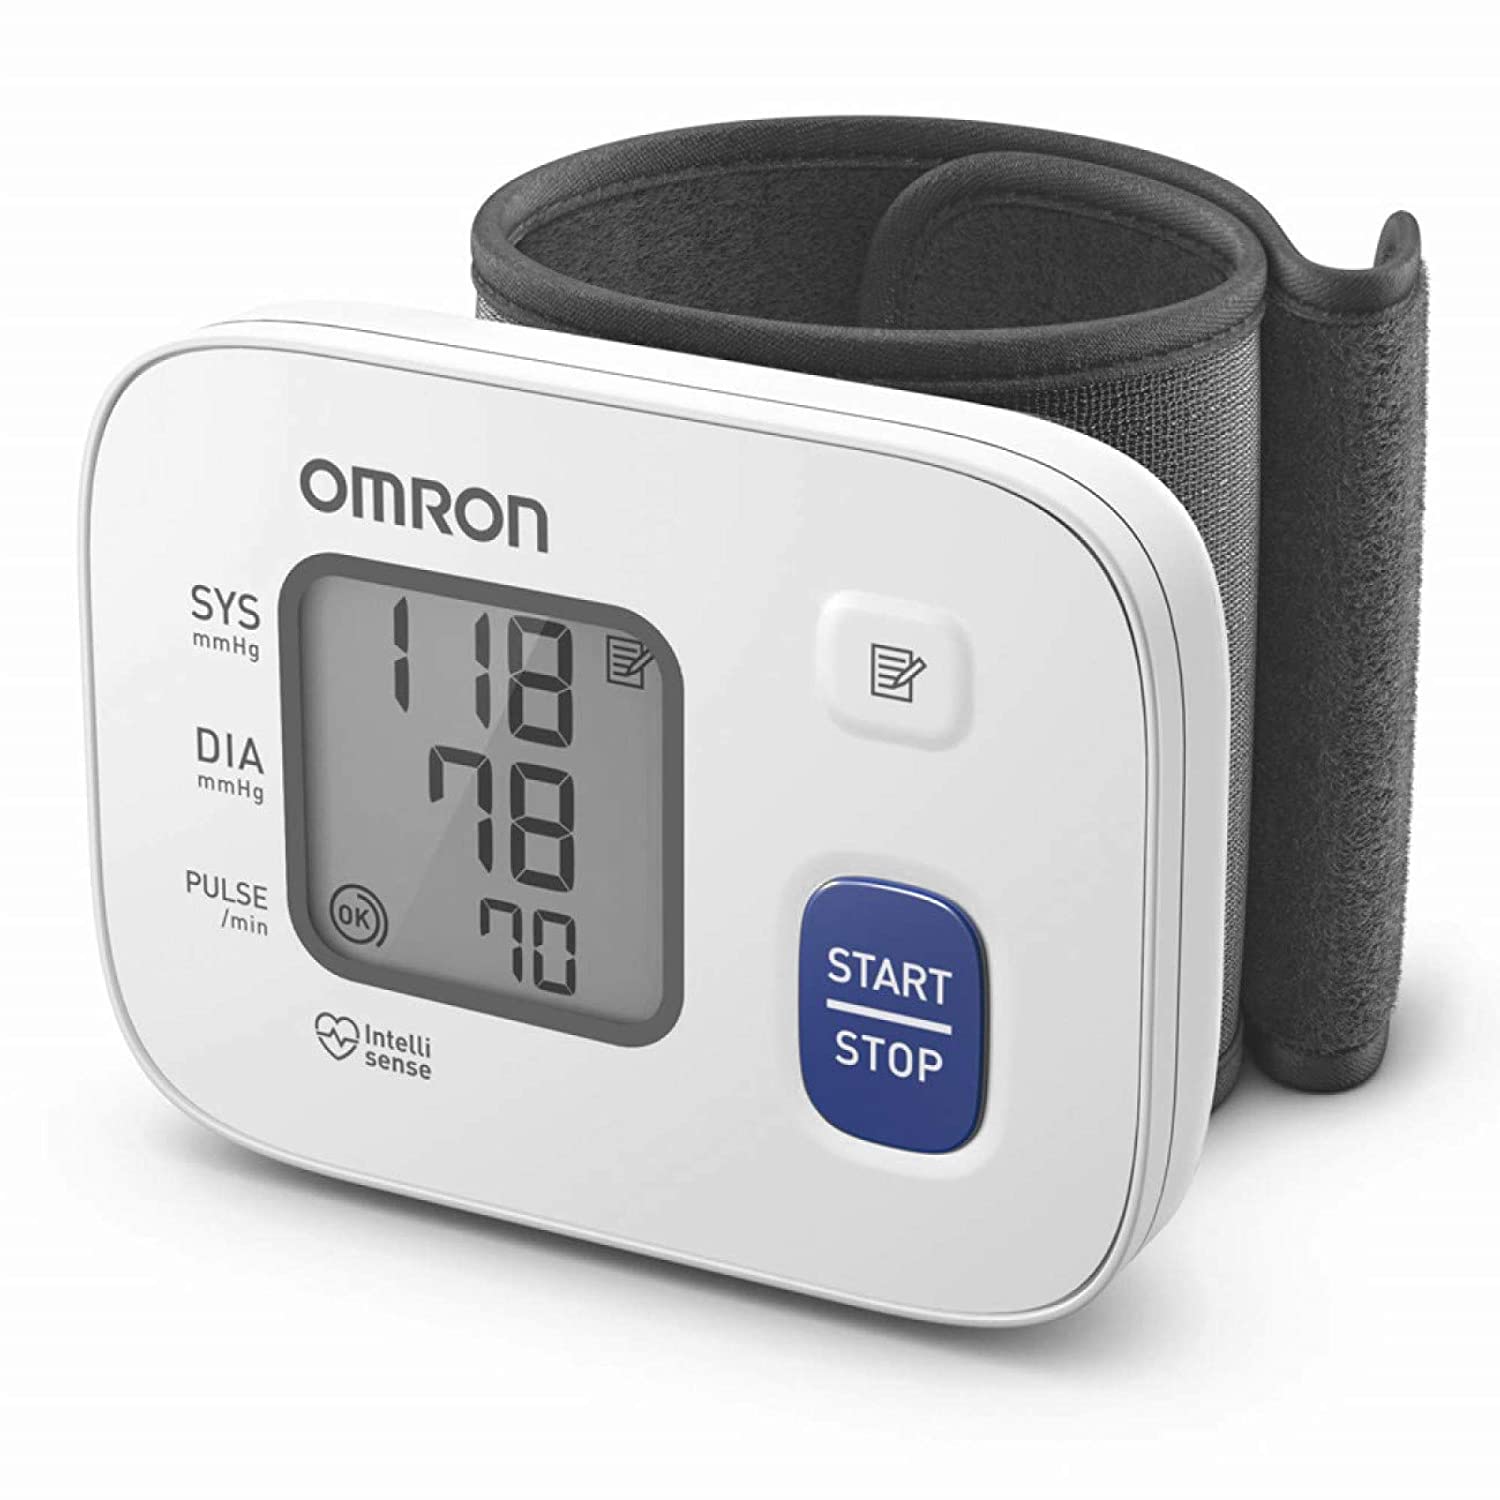 Omron HEM 6161 Fully Automatic Wrist Blood Pressure Monitor with Intellisense Technology, Cuff Wrapping Guide and Irregular Heartbeat Detection for Most Accurate Measurement (White)